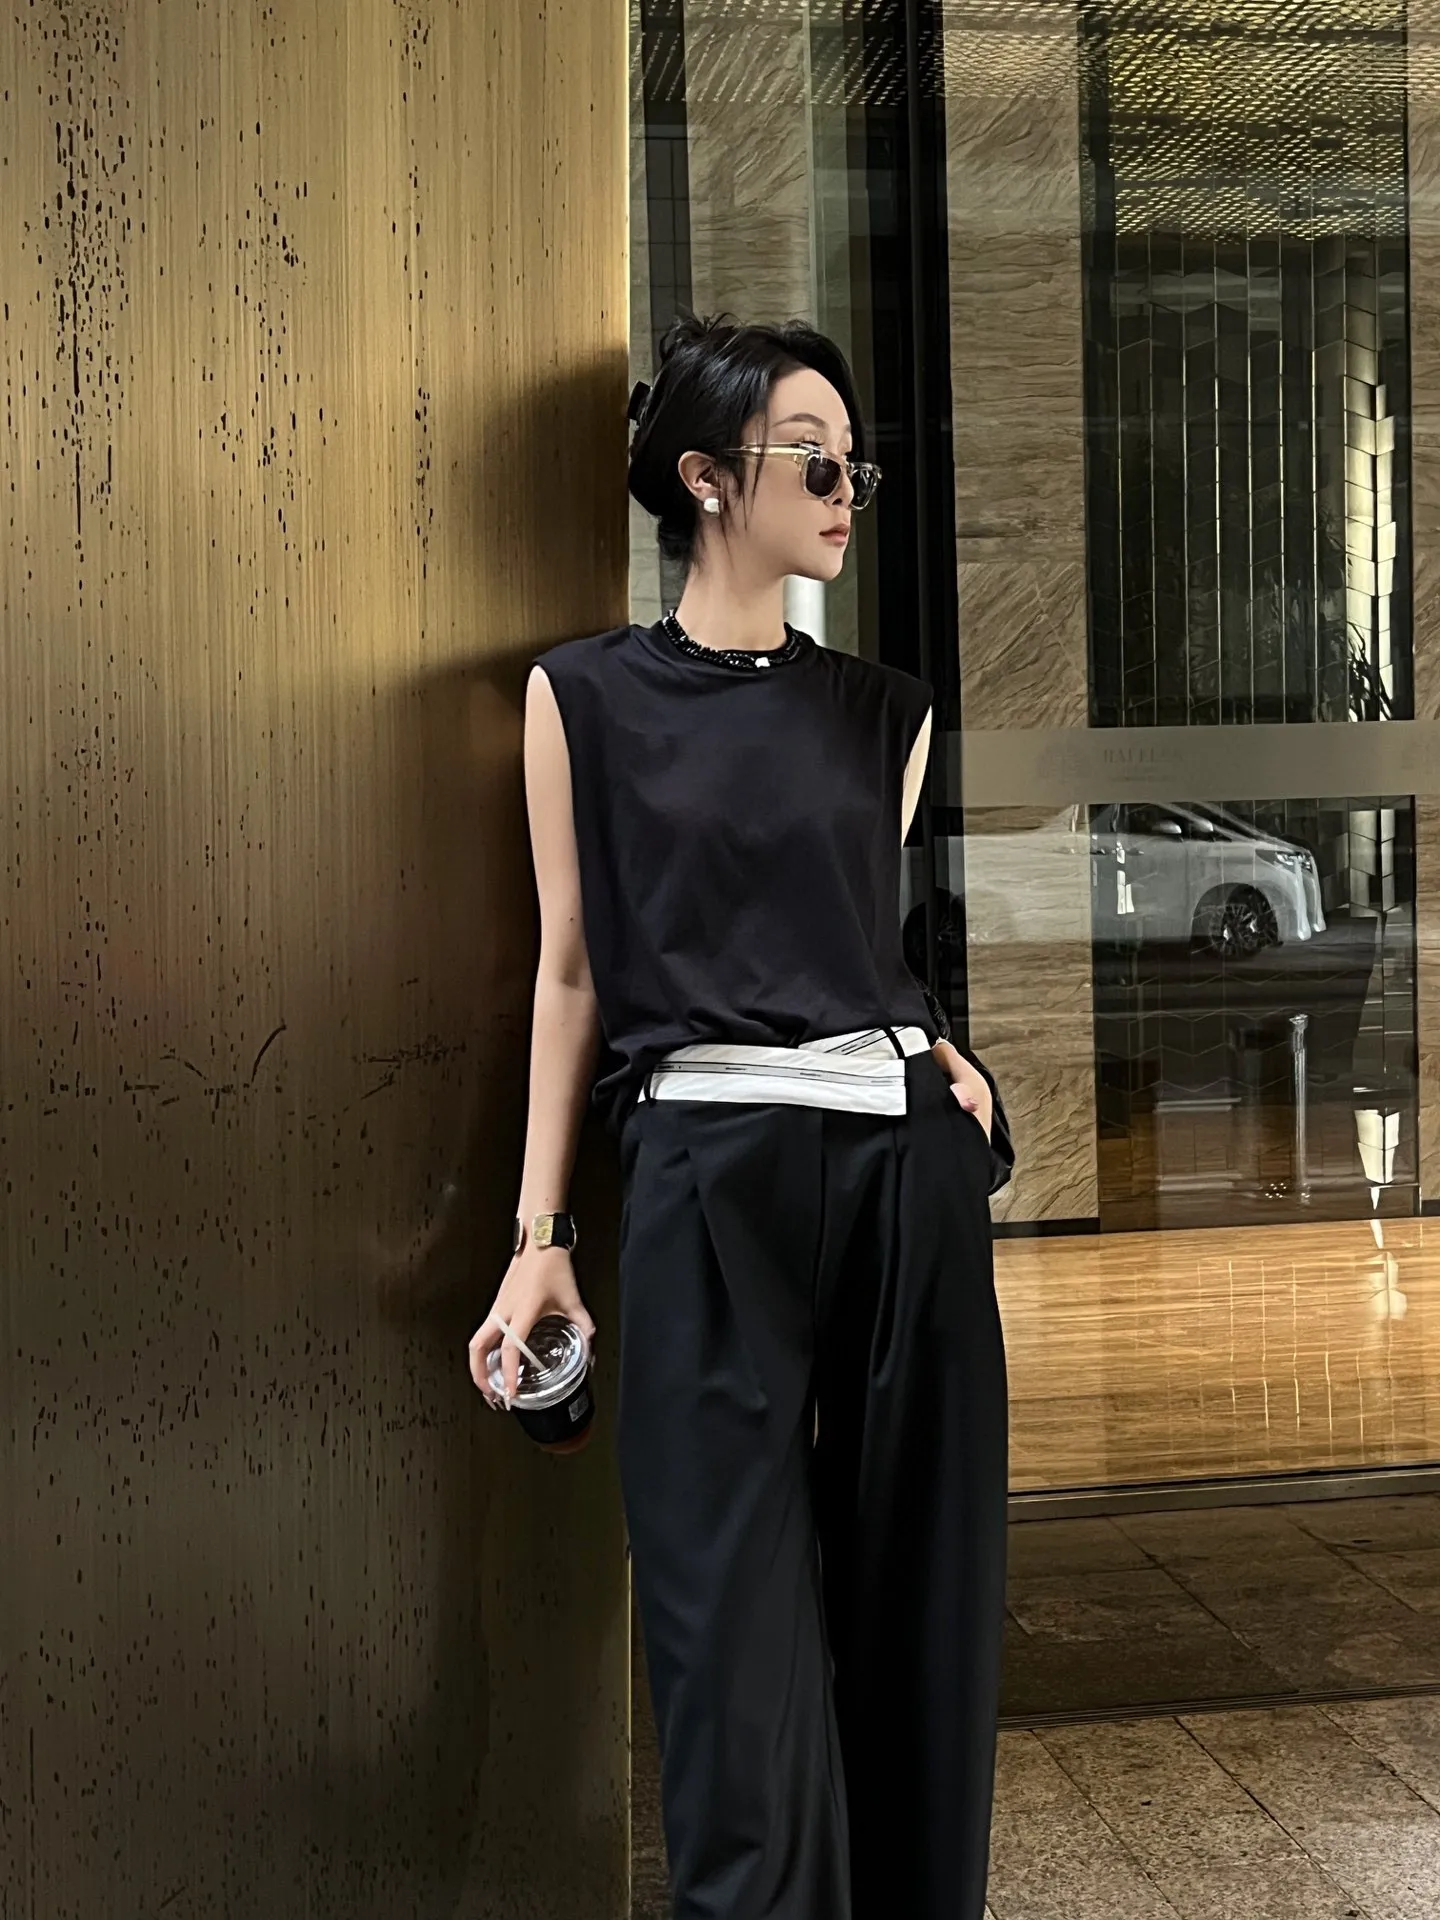 Fashion Classic Trendy Luxury Design Spring/Summer Sagging Oblique Waist Spliced Casual Straight Full Length Suit Pants Woman